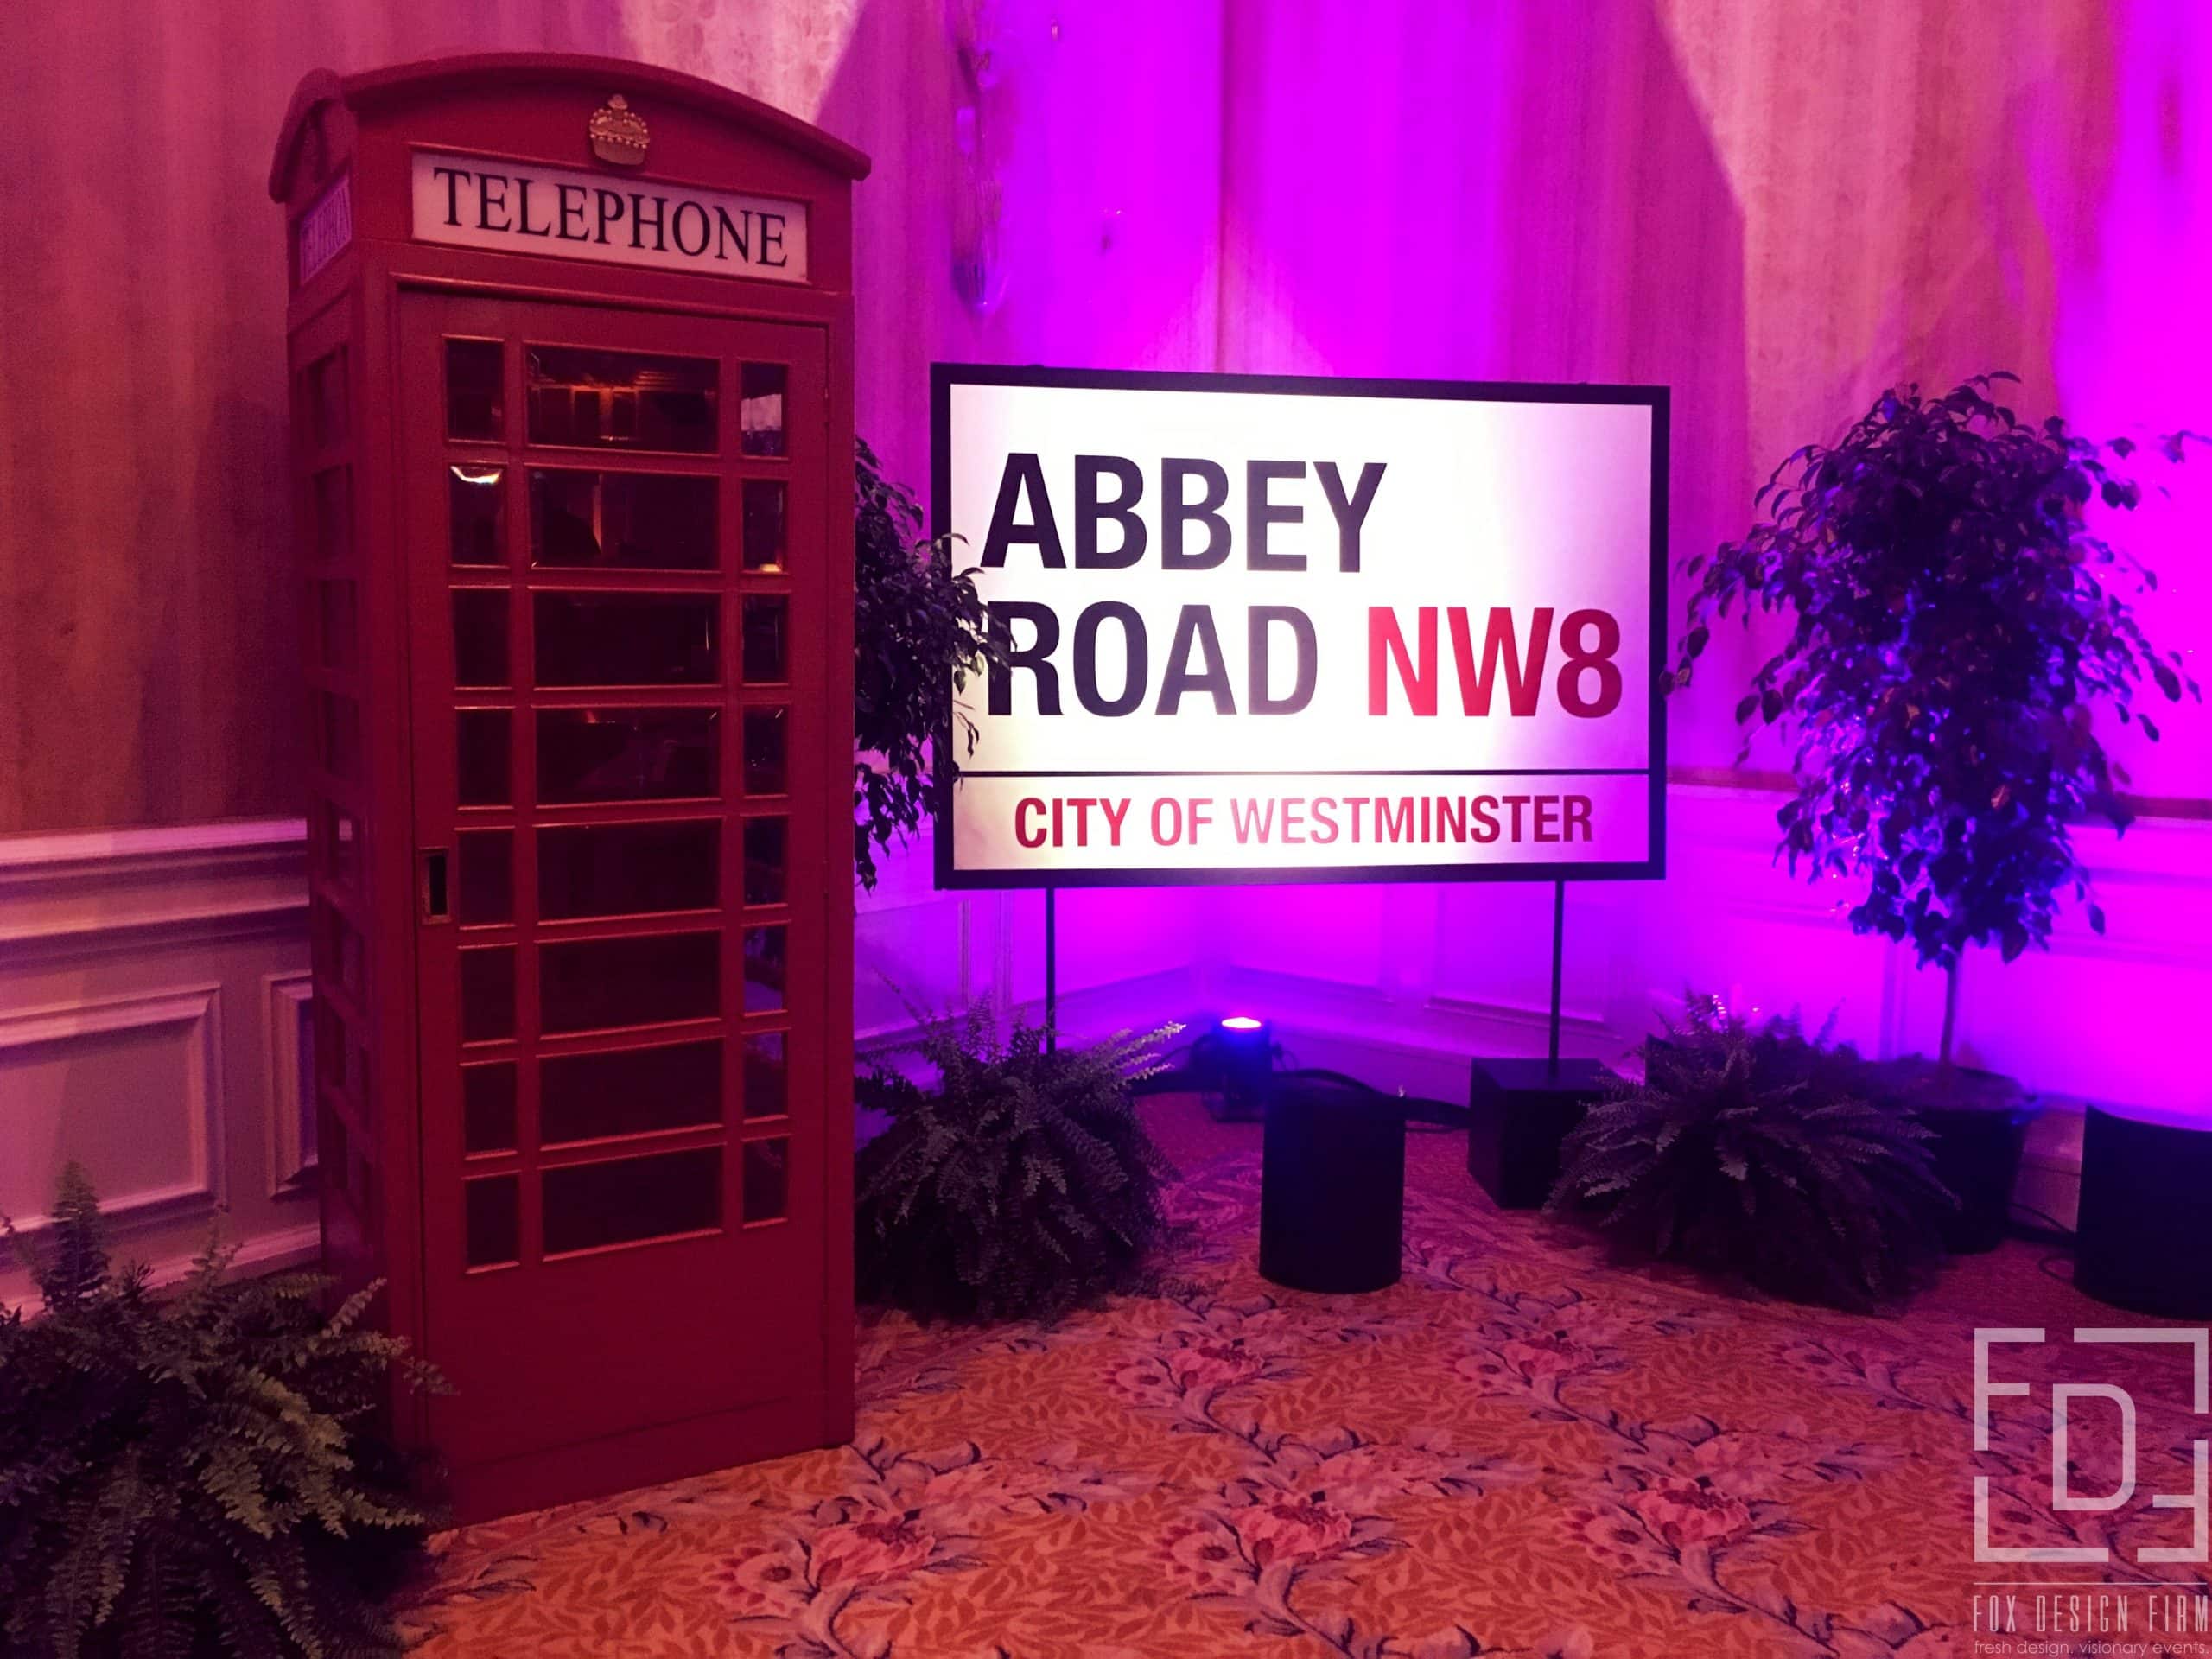 abbey road telephone booth rental